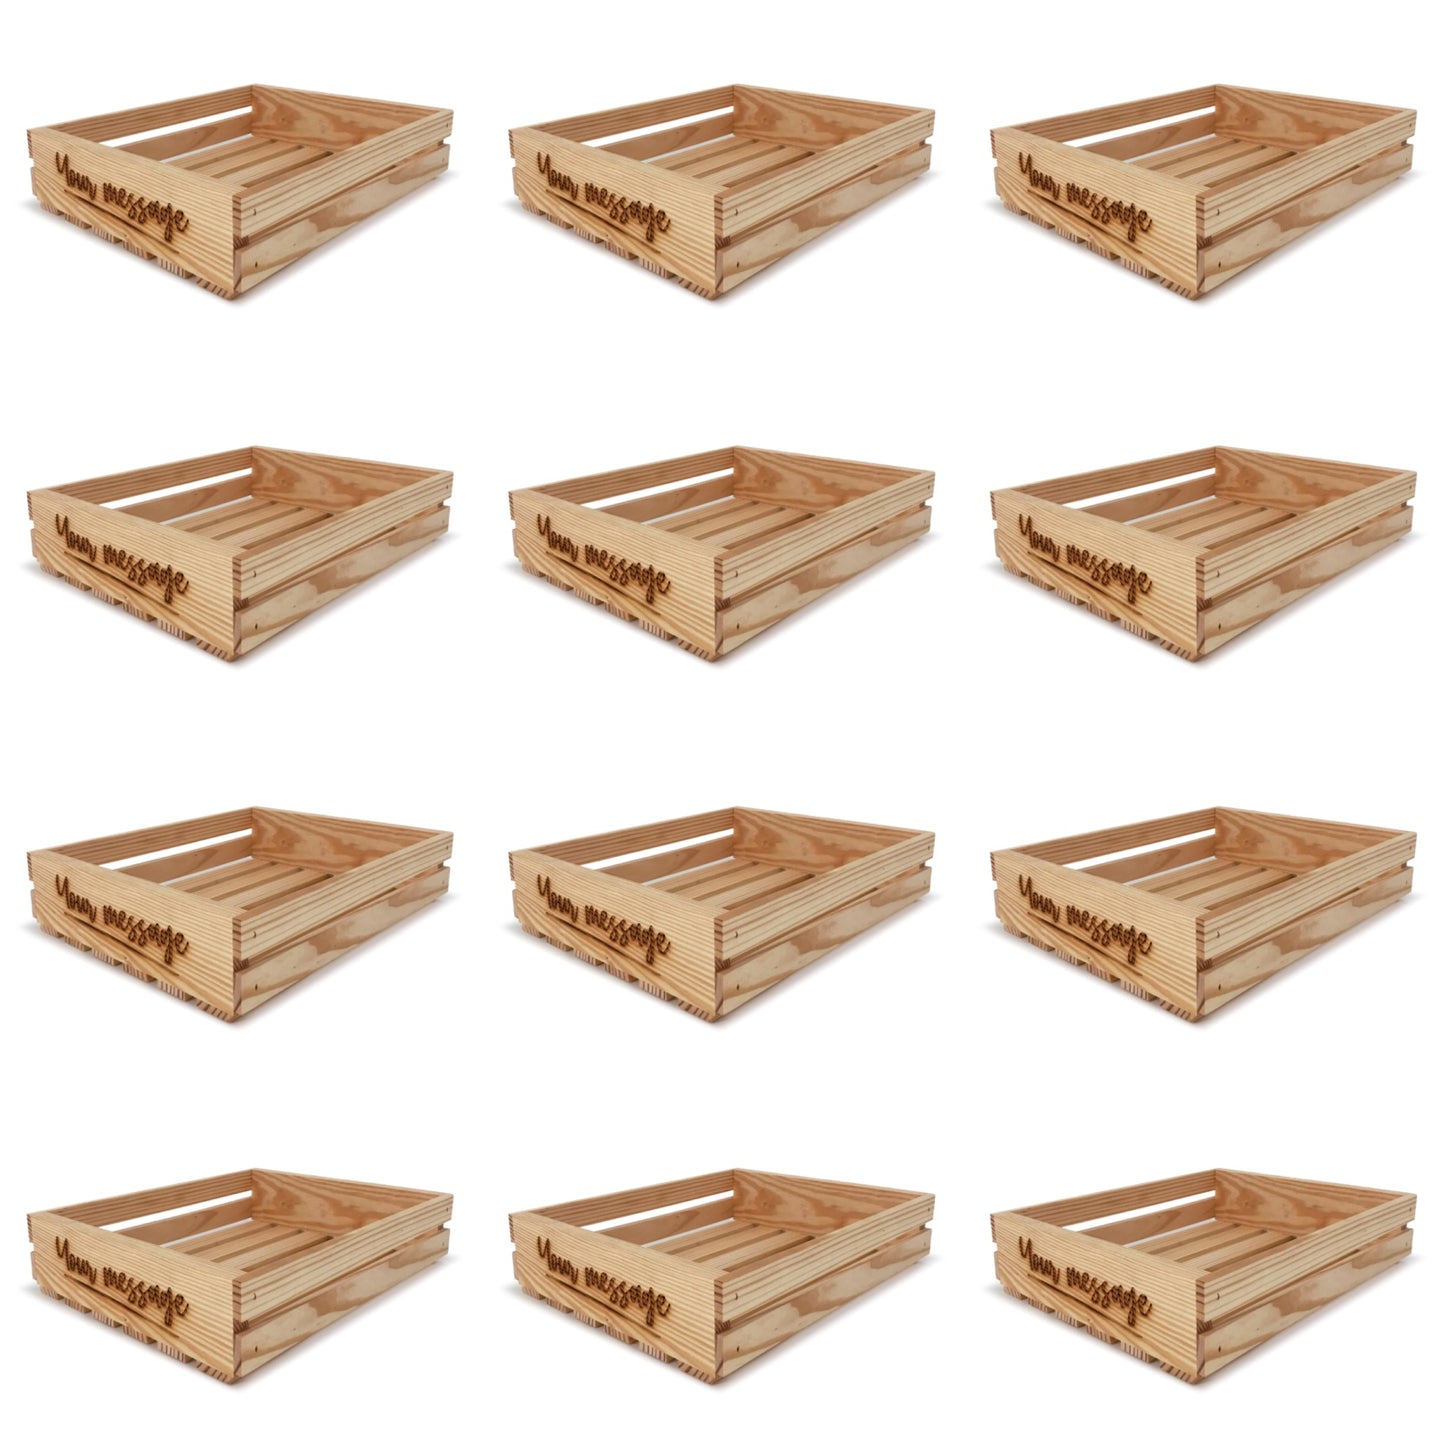 12 Customizable small wooden crates 14x12x3.5